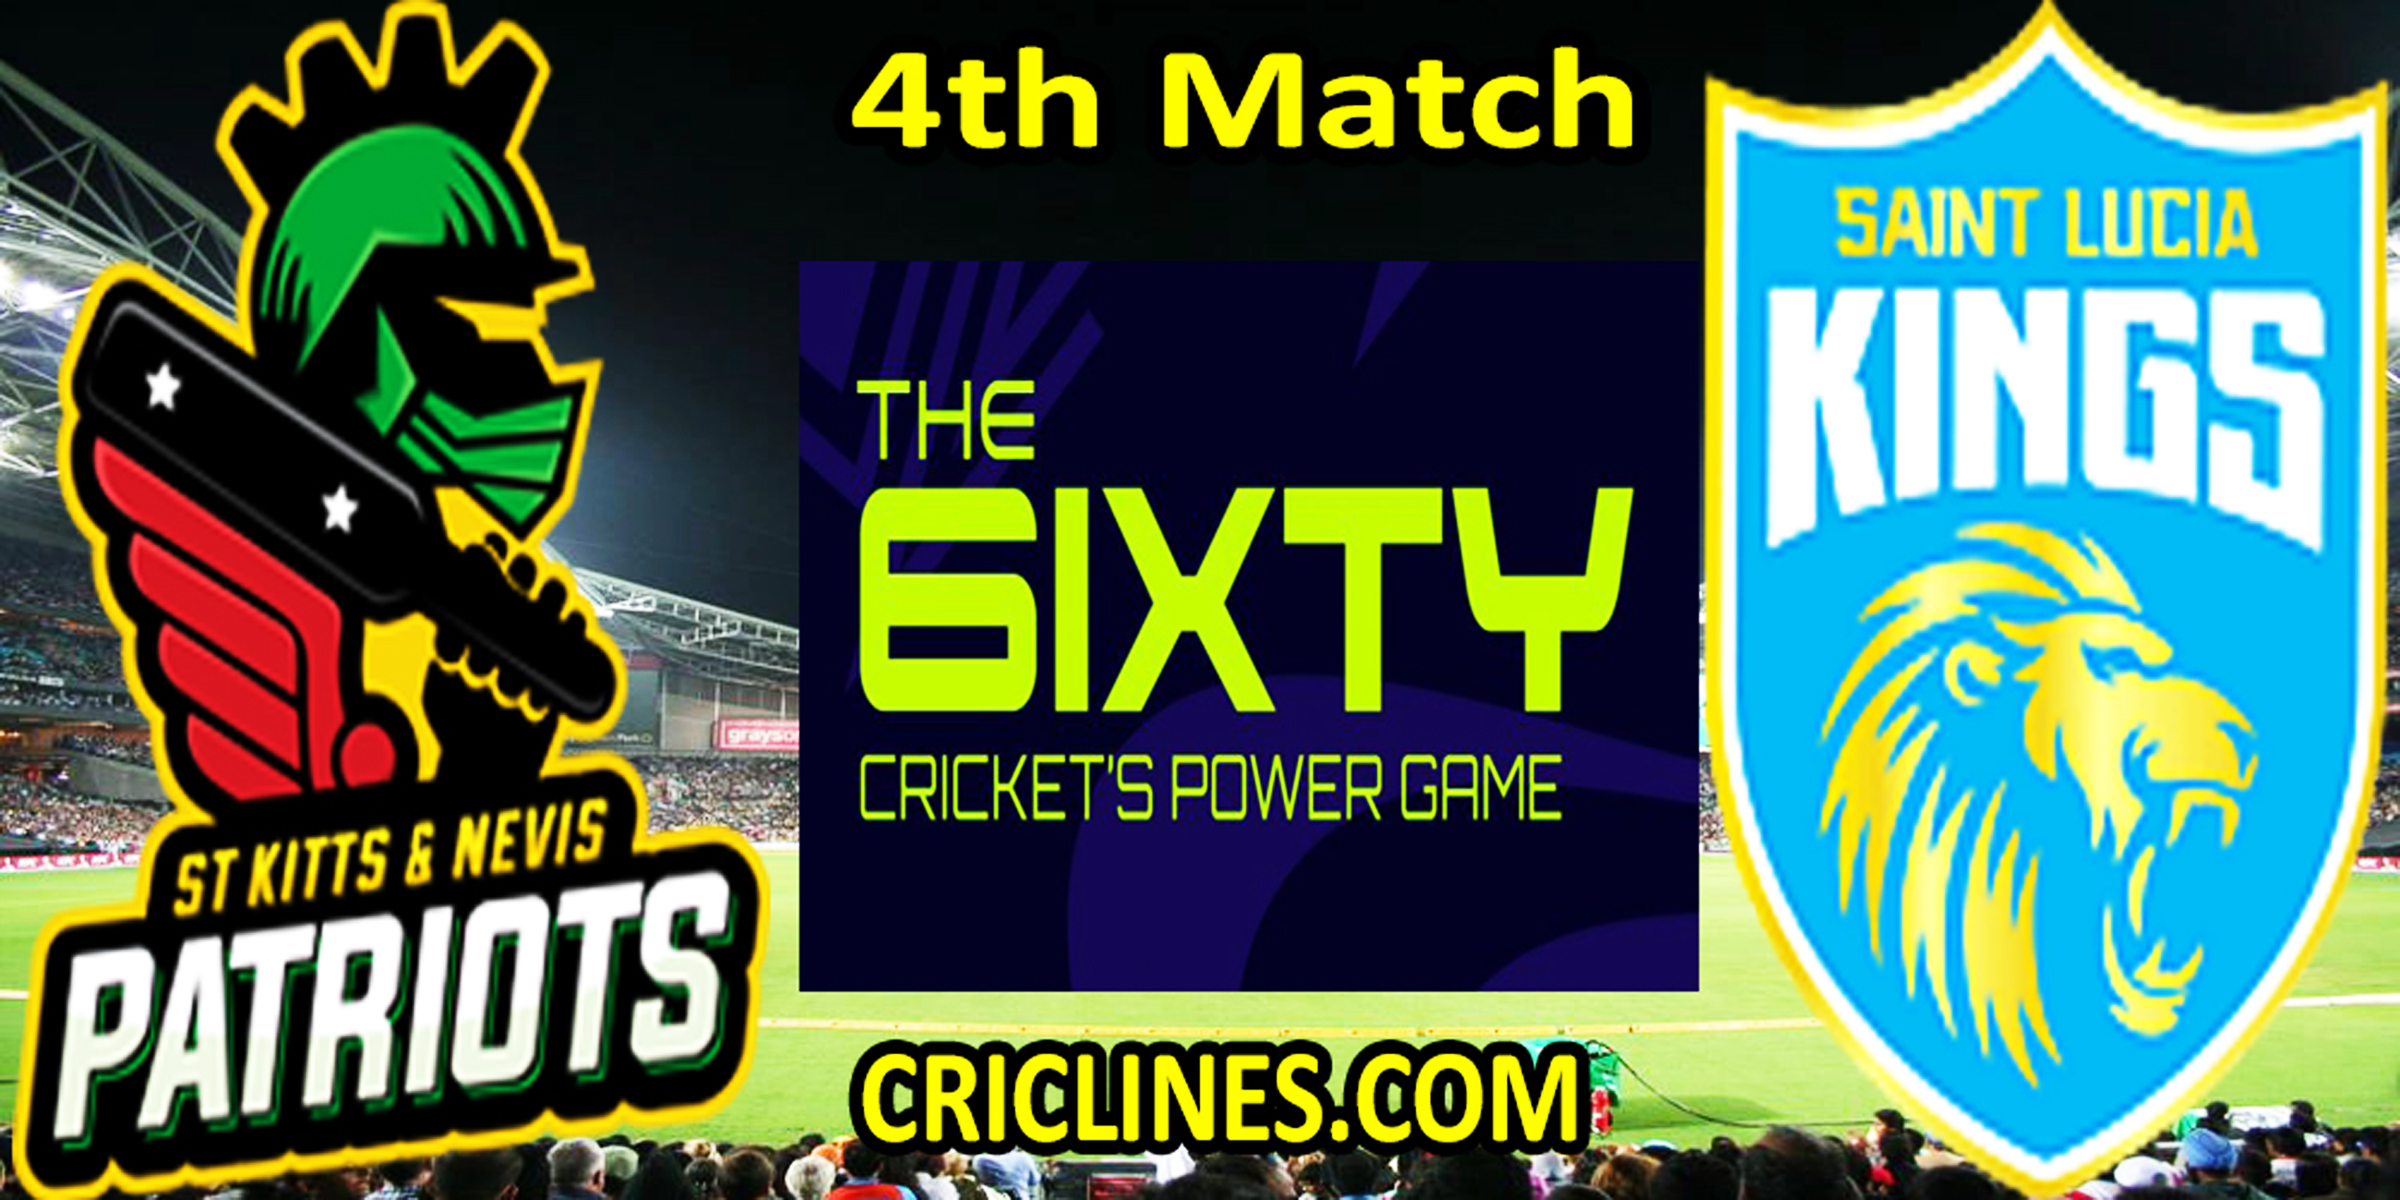 Today Match Prediction-SNP vs SLK-The 6ixty 2022-4th Match-Who Will Win